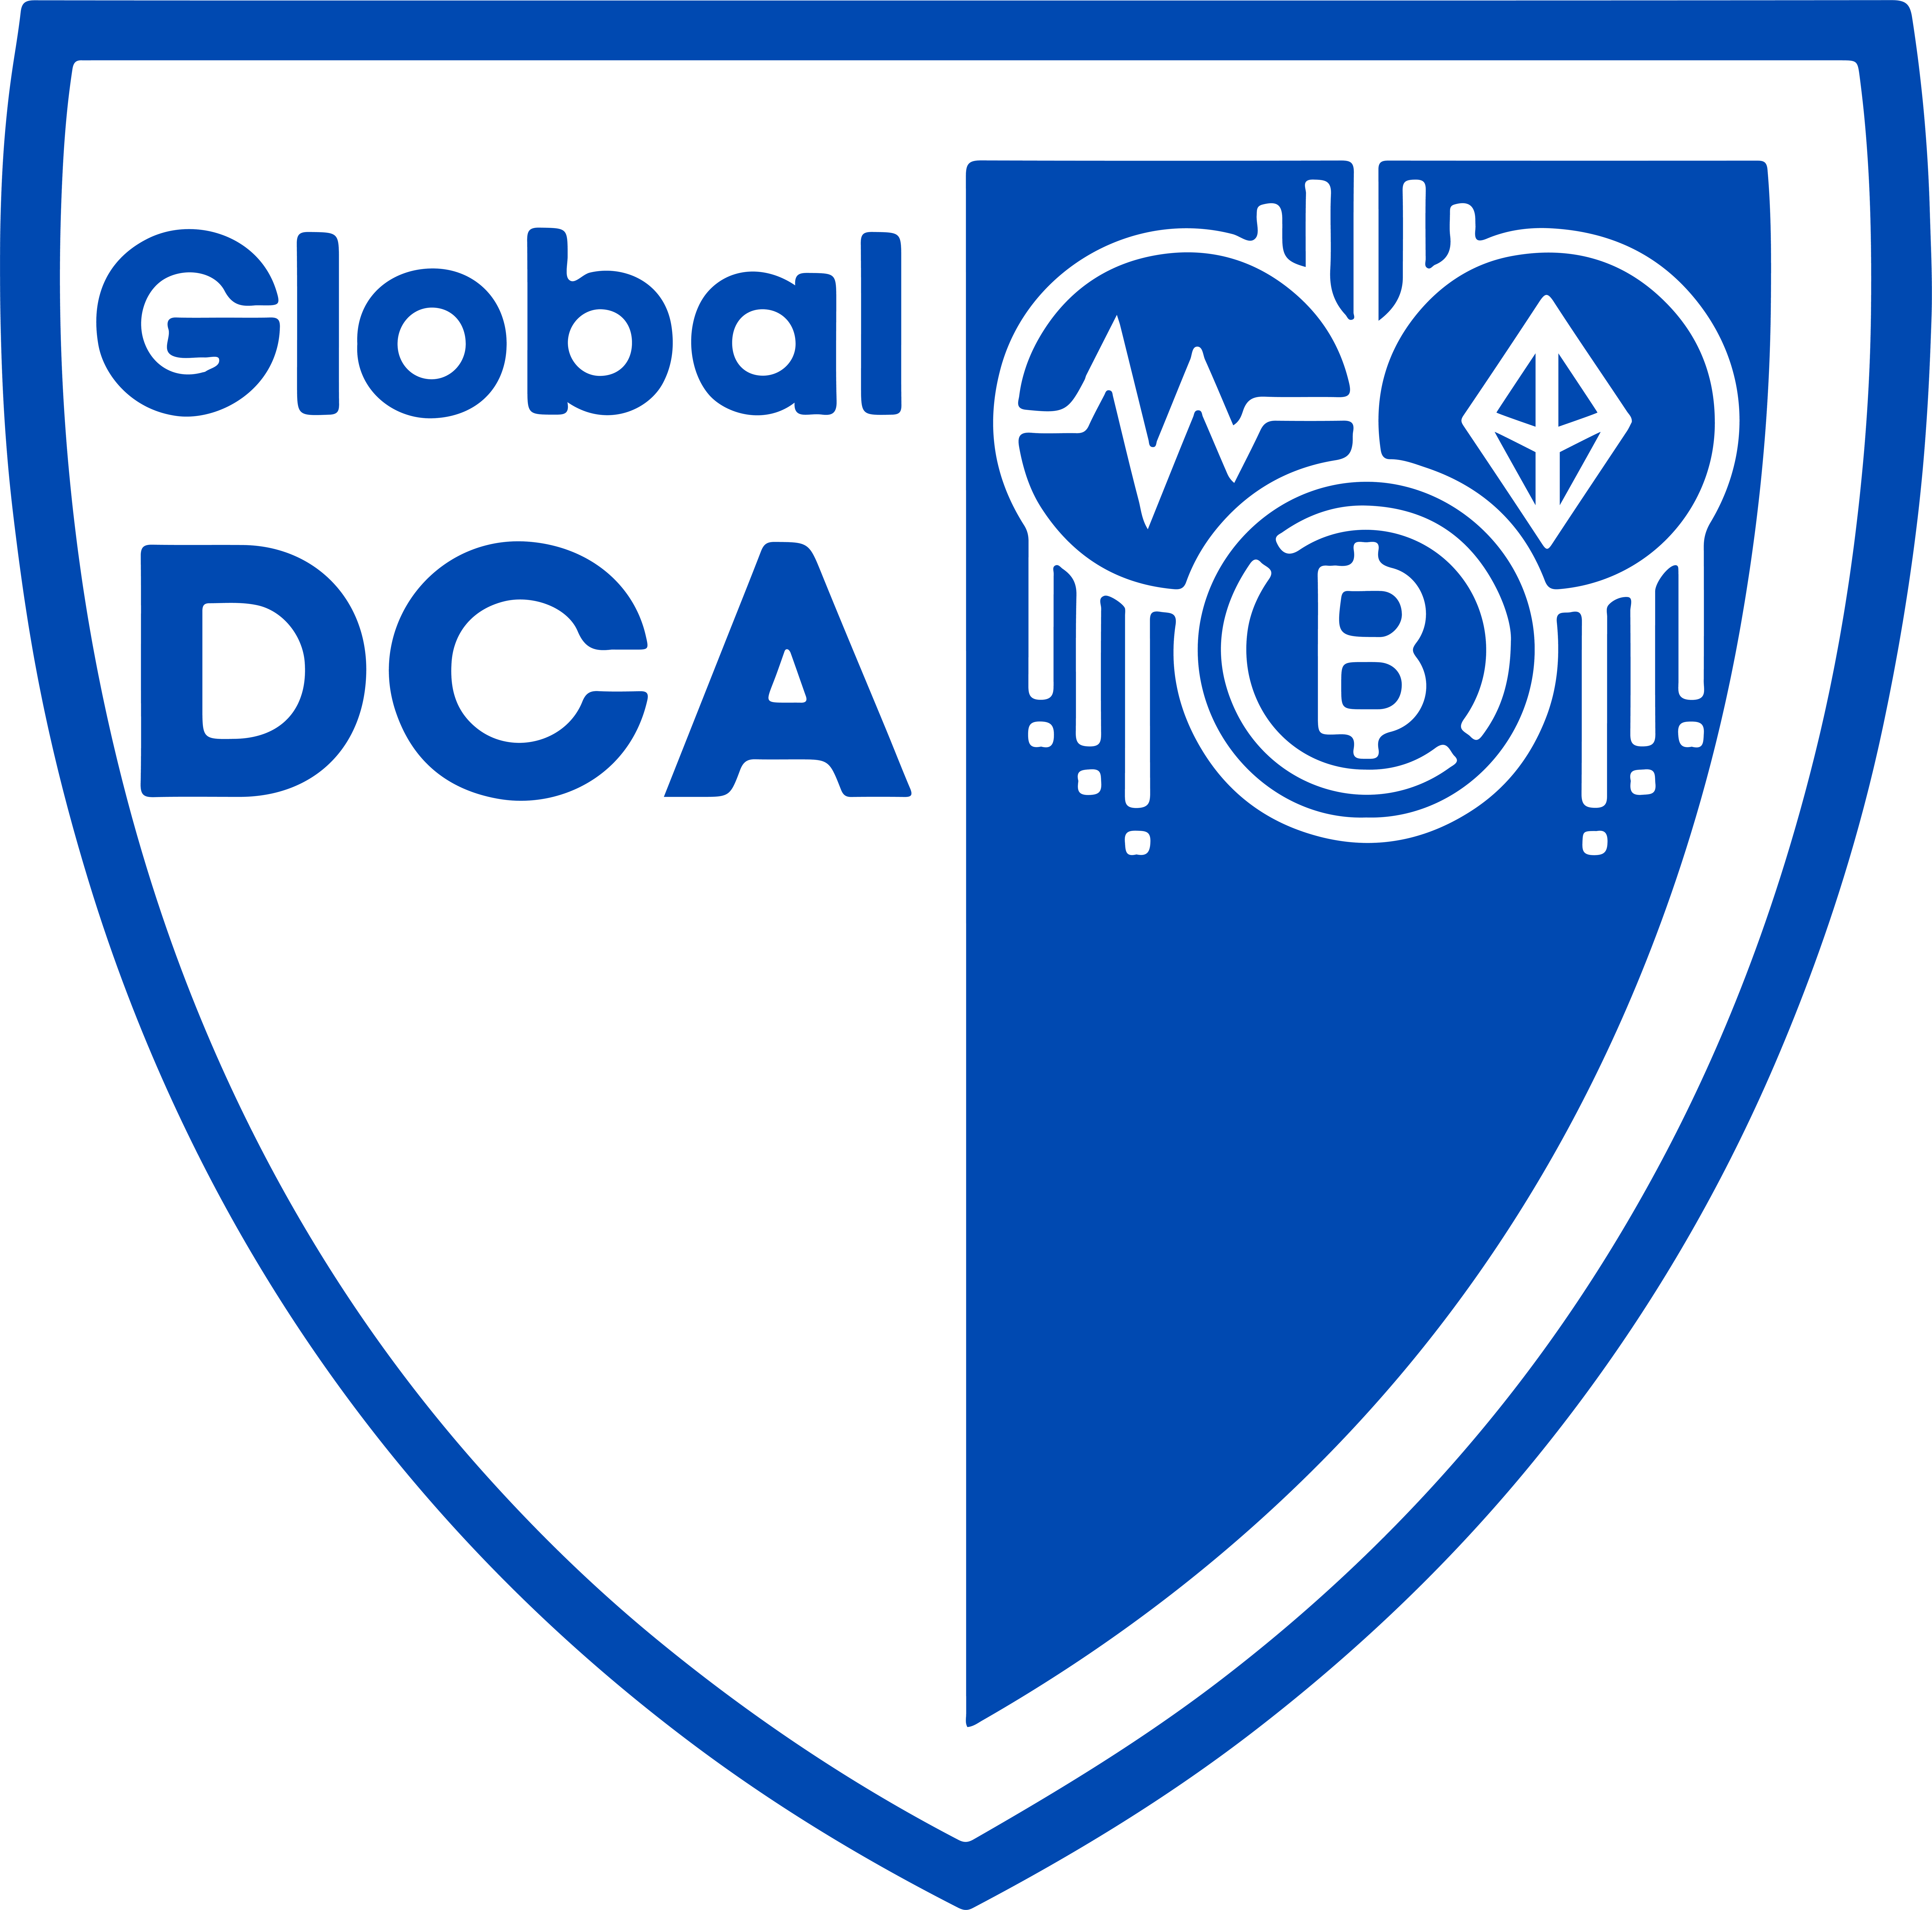 An Open Letter to the Digital Assets Industry from the Members of the Global DCA